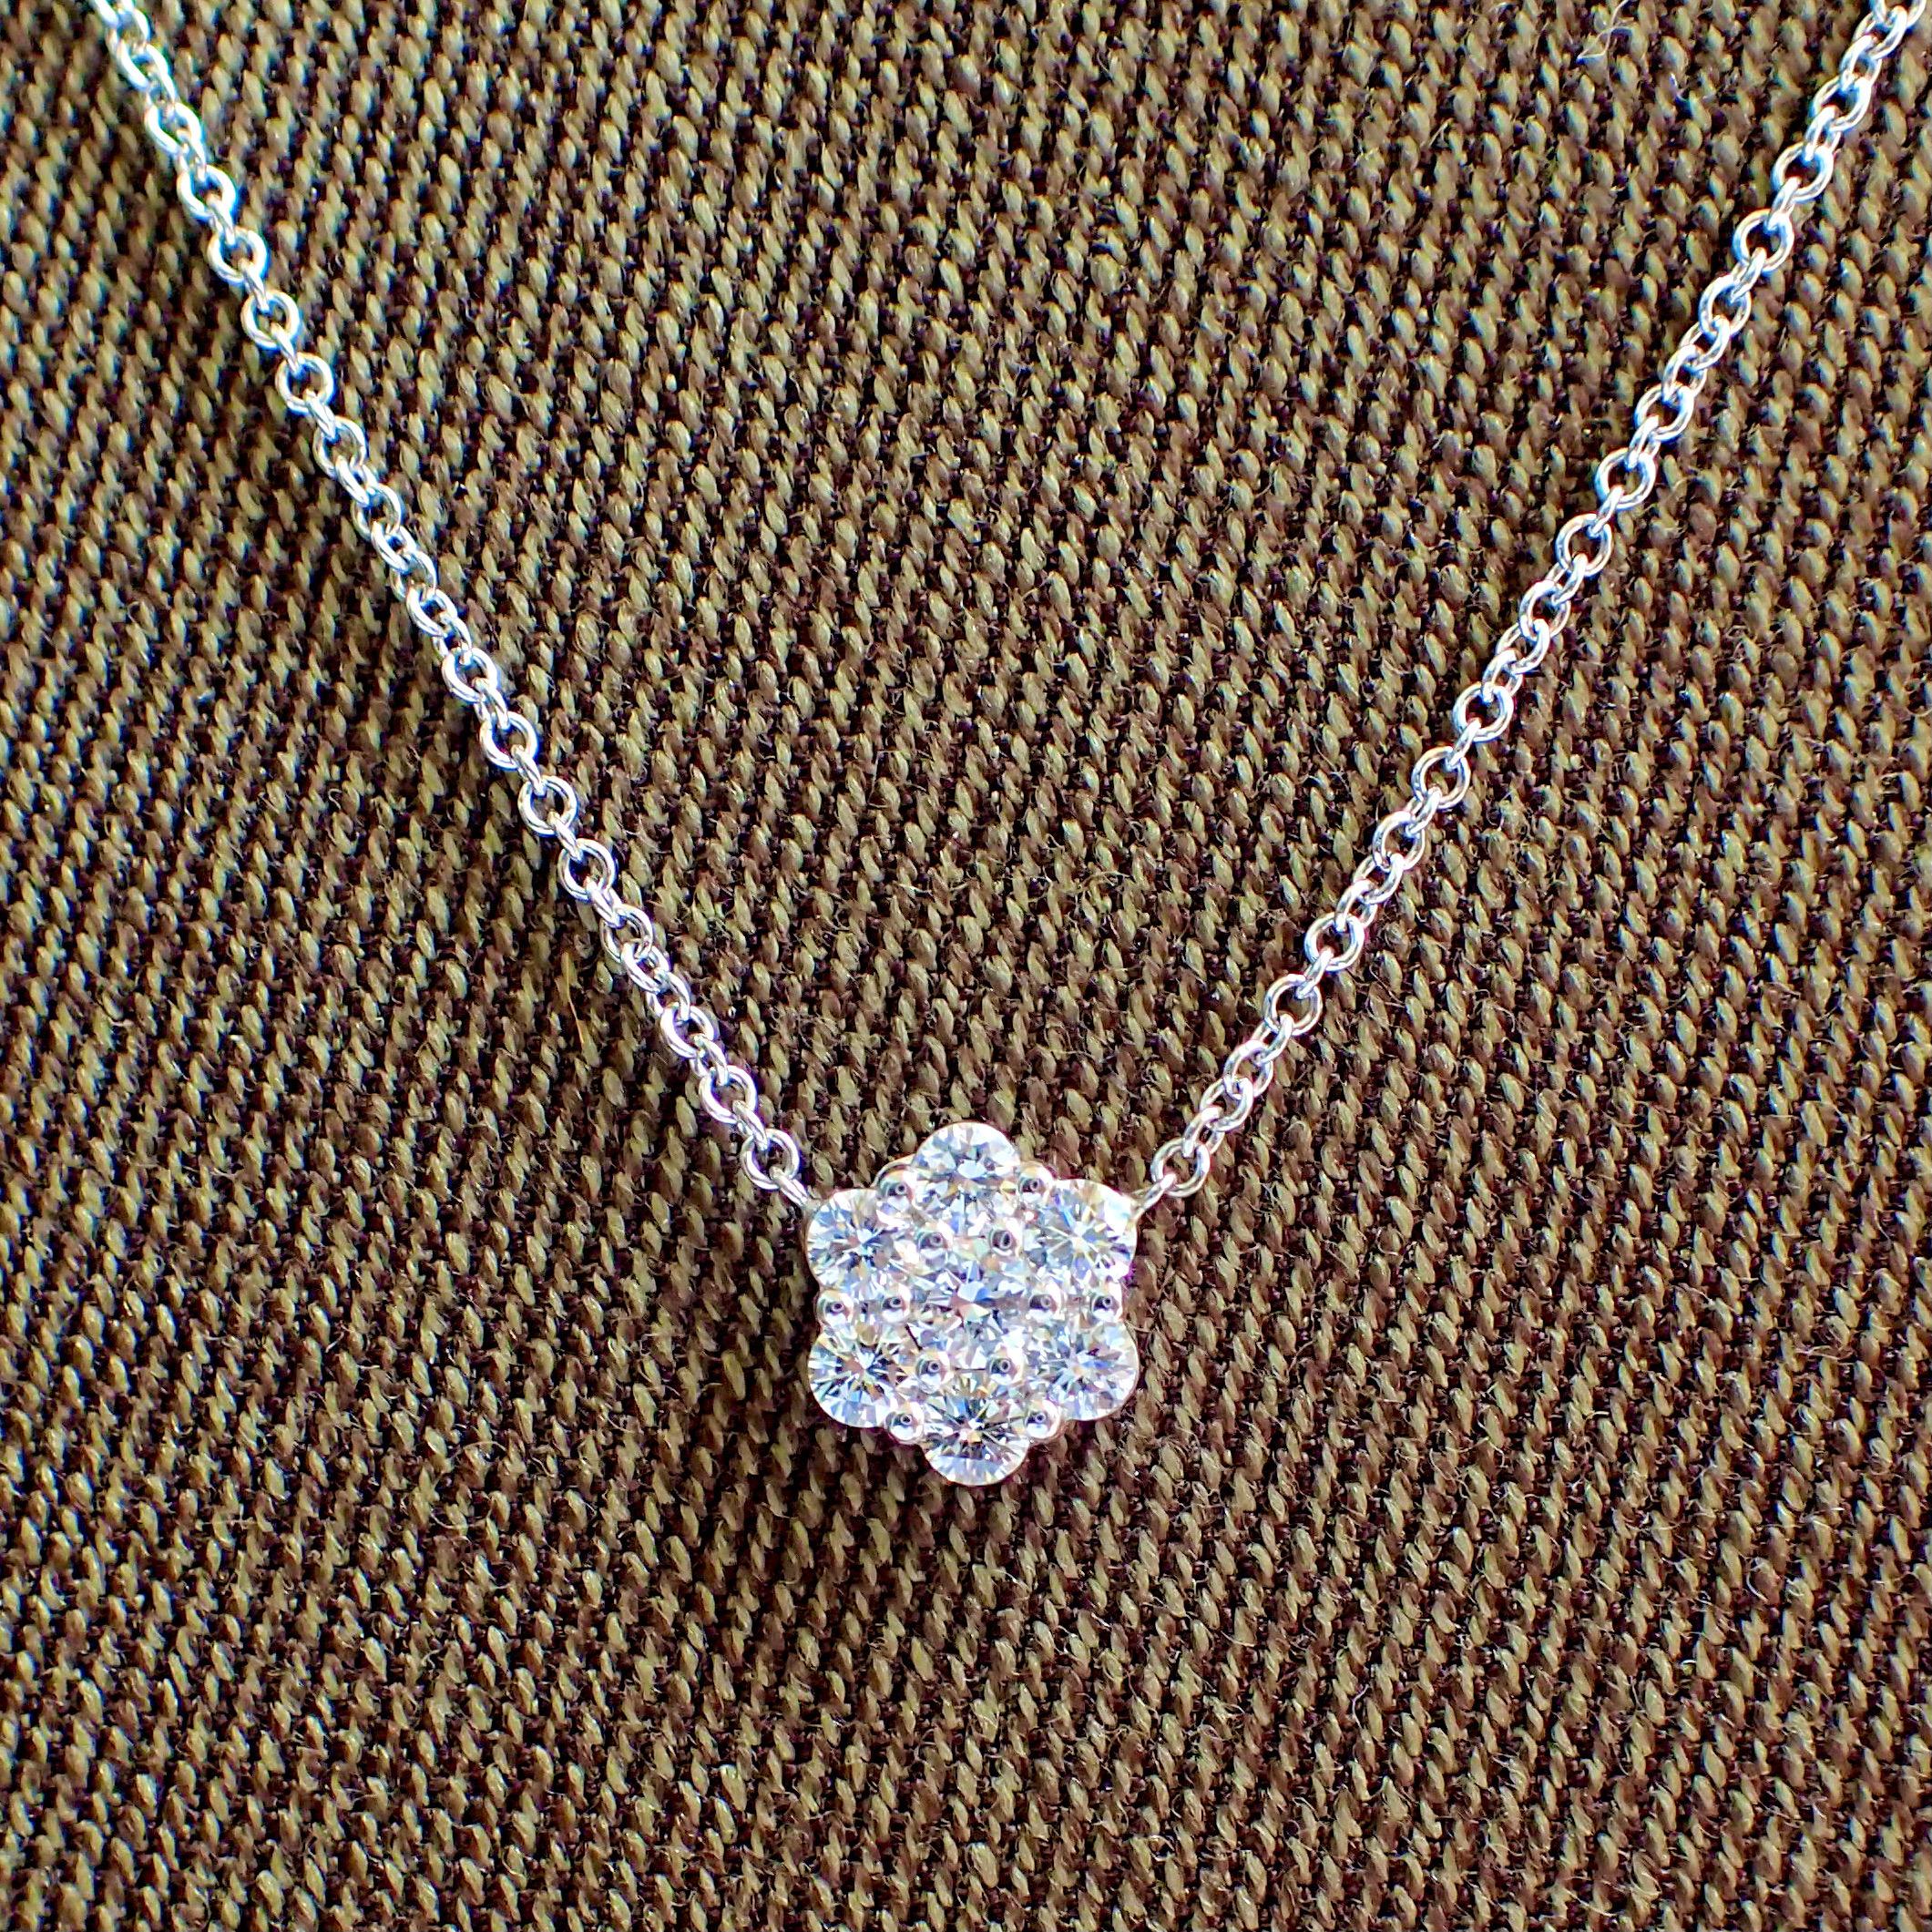 18k White Gold Pendant with 0.44 carats of Diamond hangs from a 16